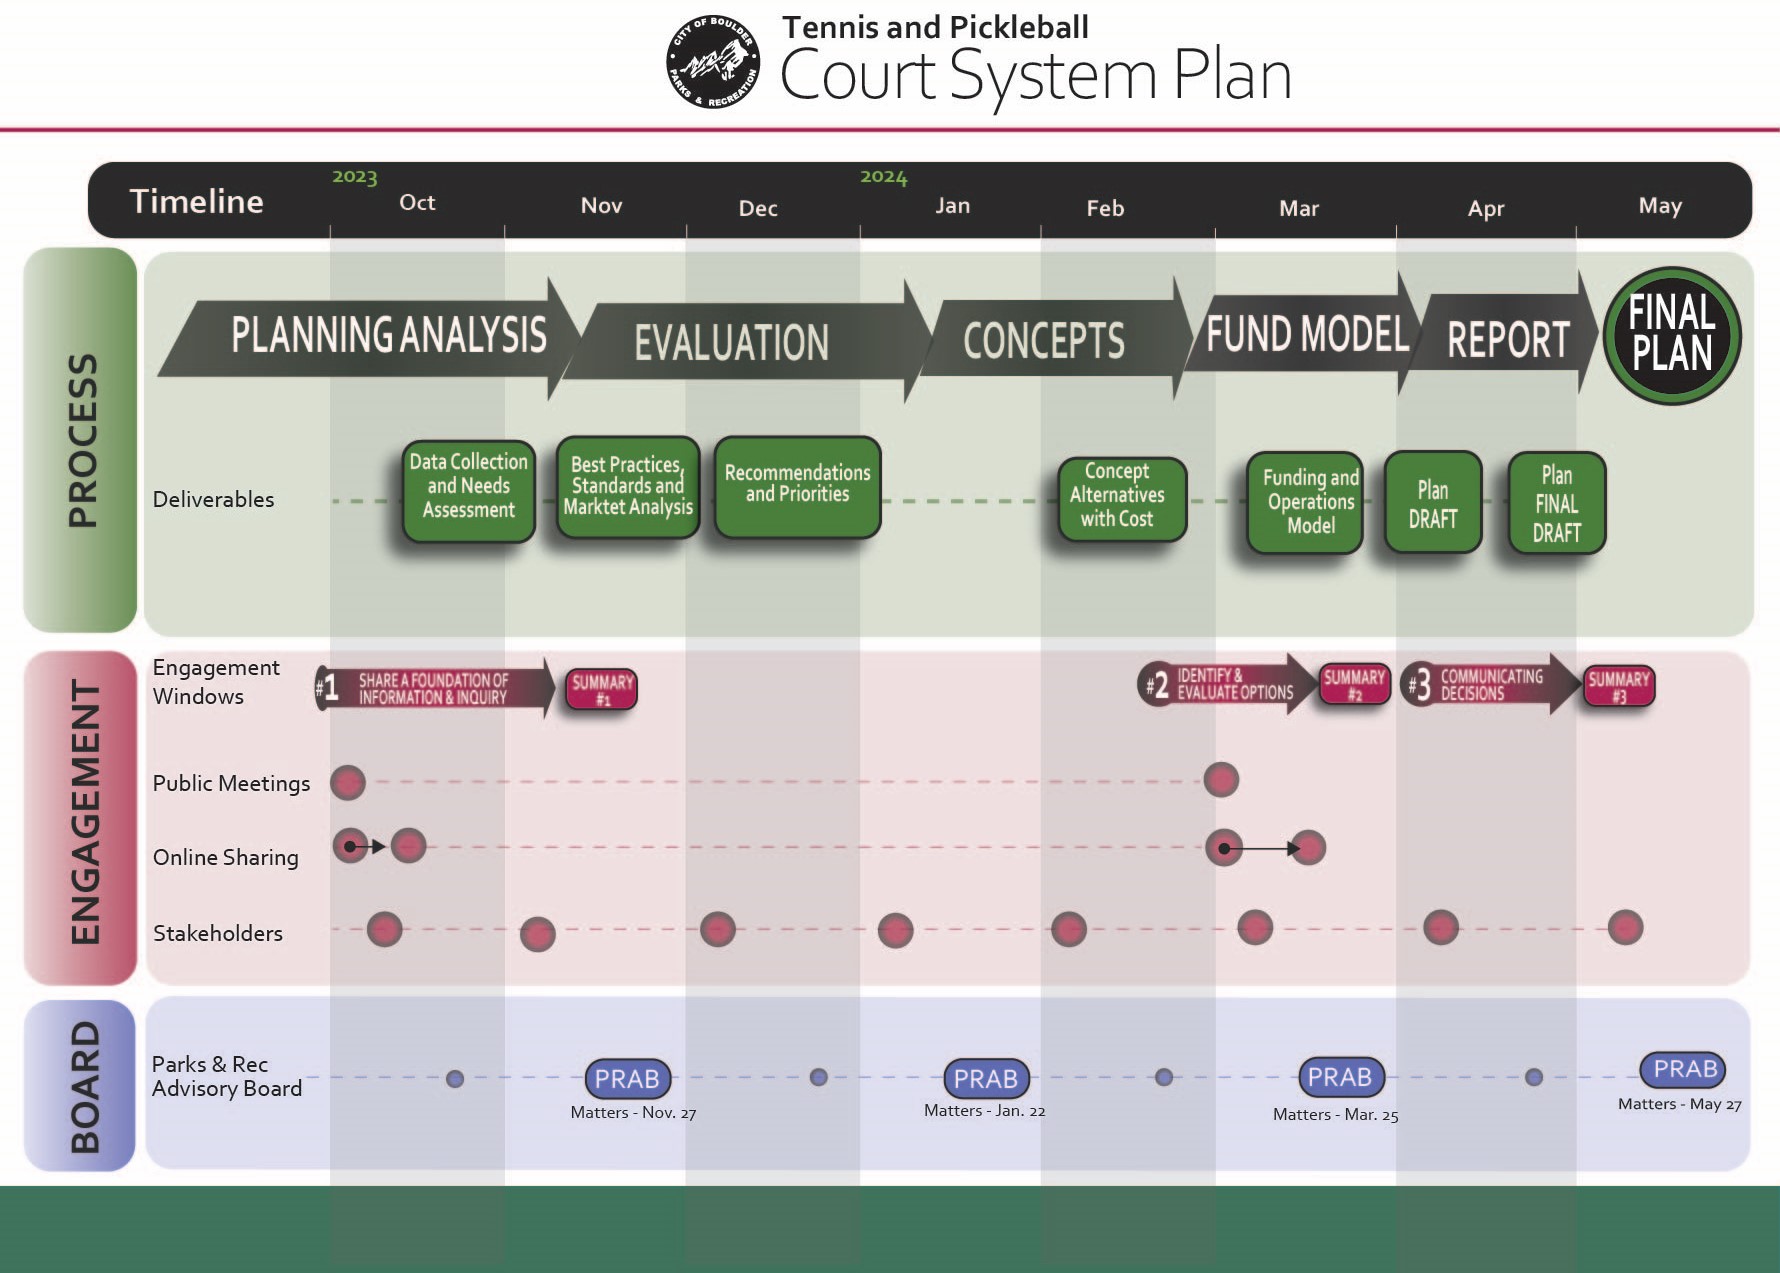 Tennis and Pickleball Court System Plan timeline. Text description is included below.